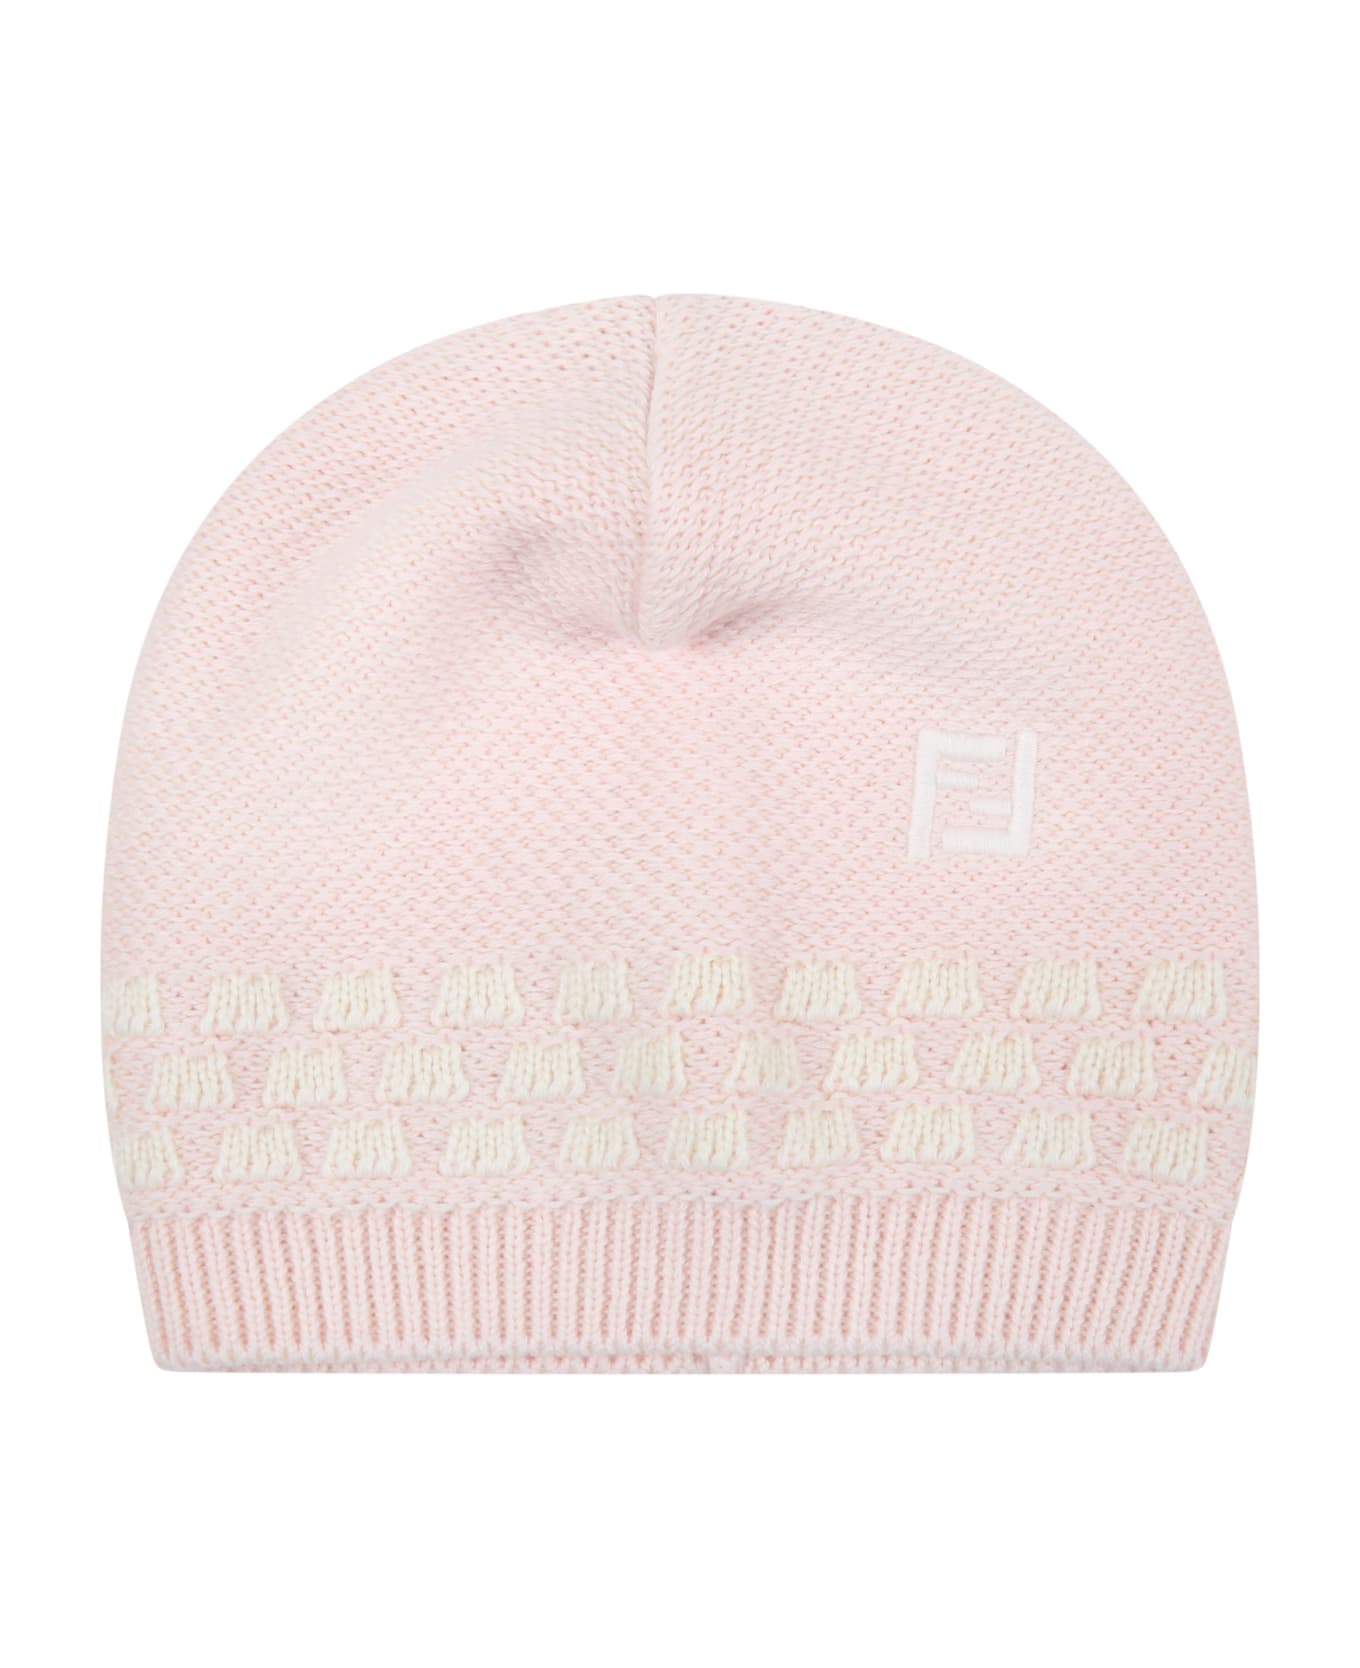 Fendi Pink Set For Baby Girl With Douple Ff - Pink